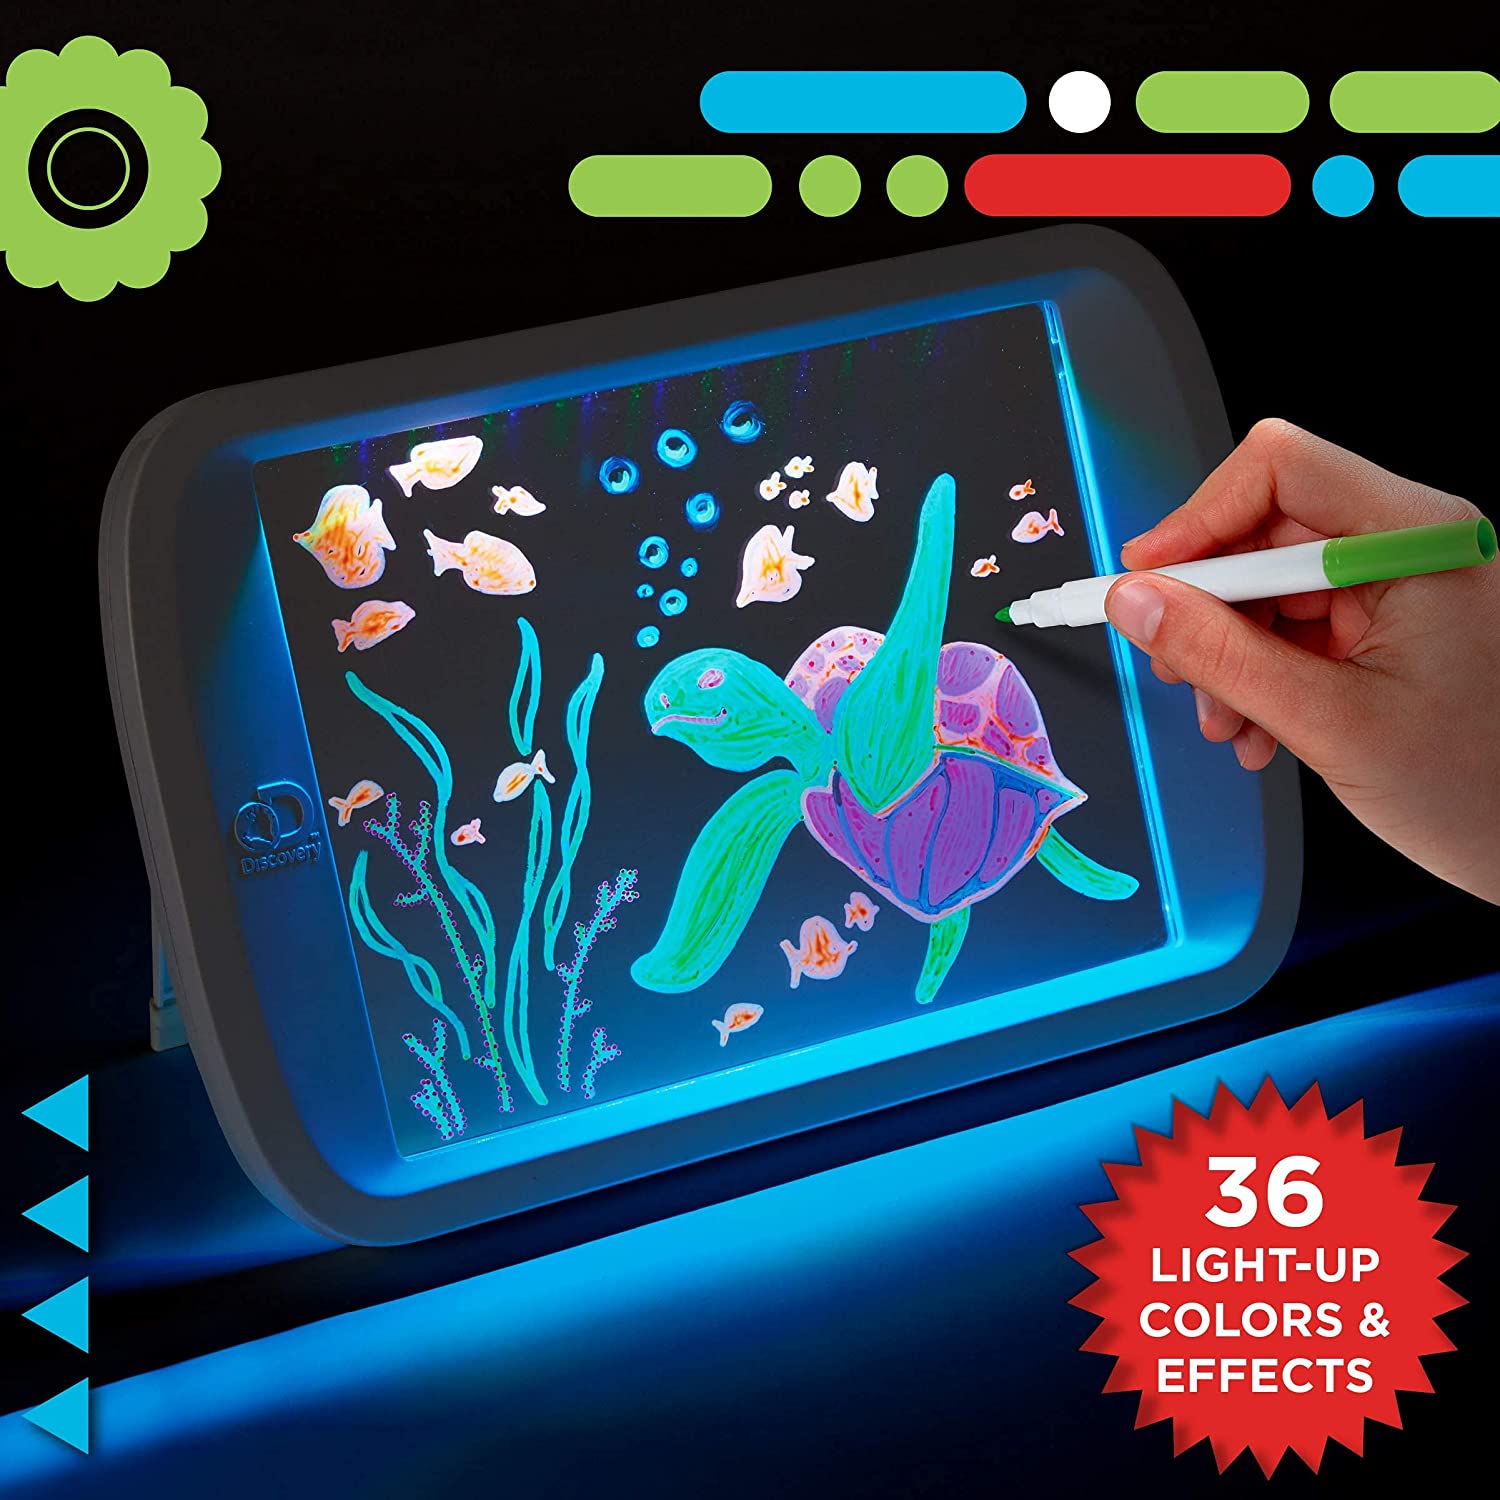 Electronic-Learning-LED-Glow-Drawing-Board-Kids-Doodle-Board-Set-Interactive-Handwriting-Writing-Drawing-Pad-with-4-Fluorescent-Markers-3D-Glasses-for-Girls-Boys-45